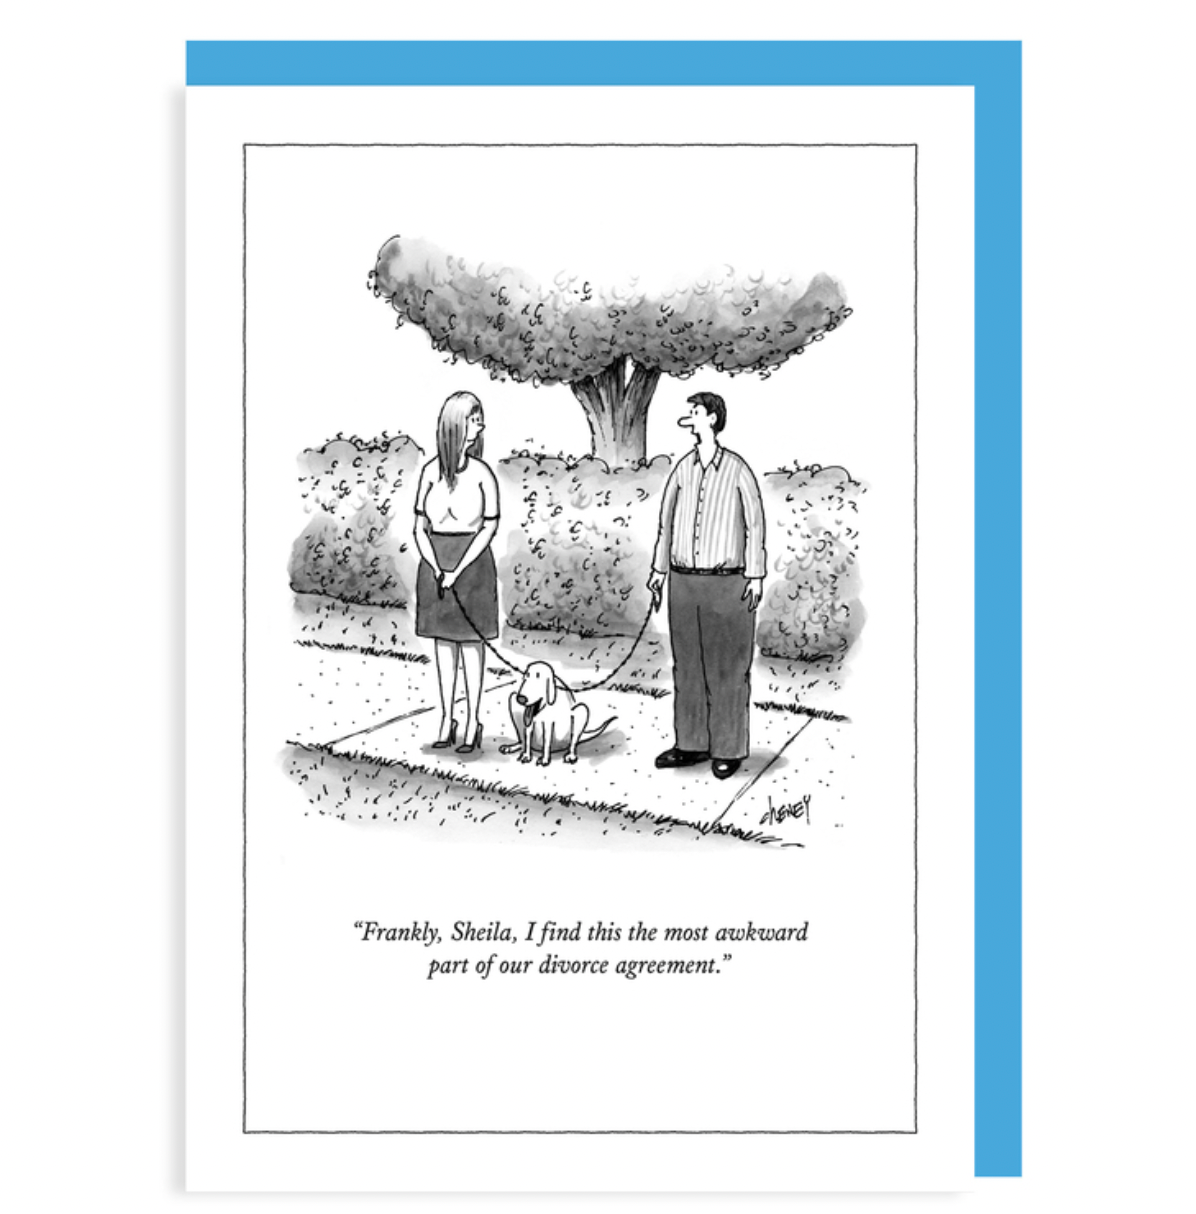 New Yorker Note Card -  Divorce Agreement